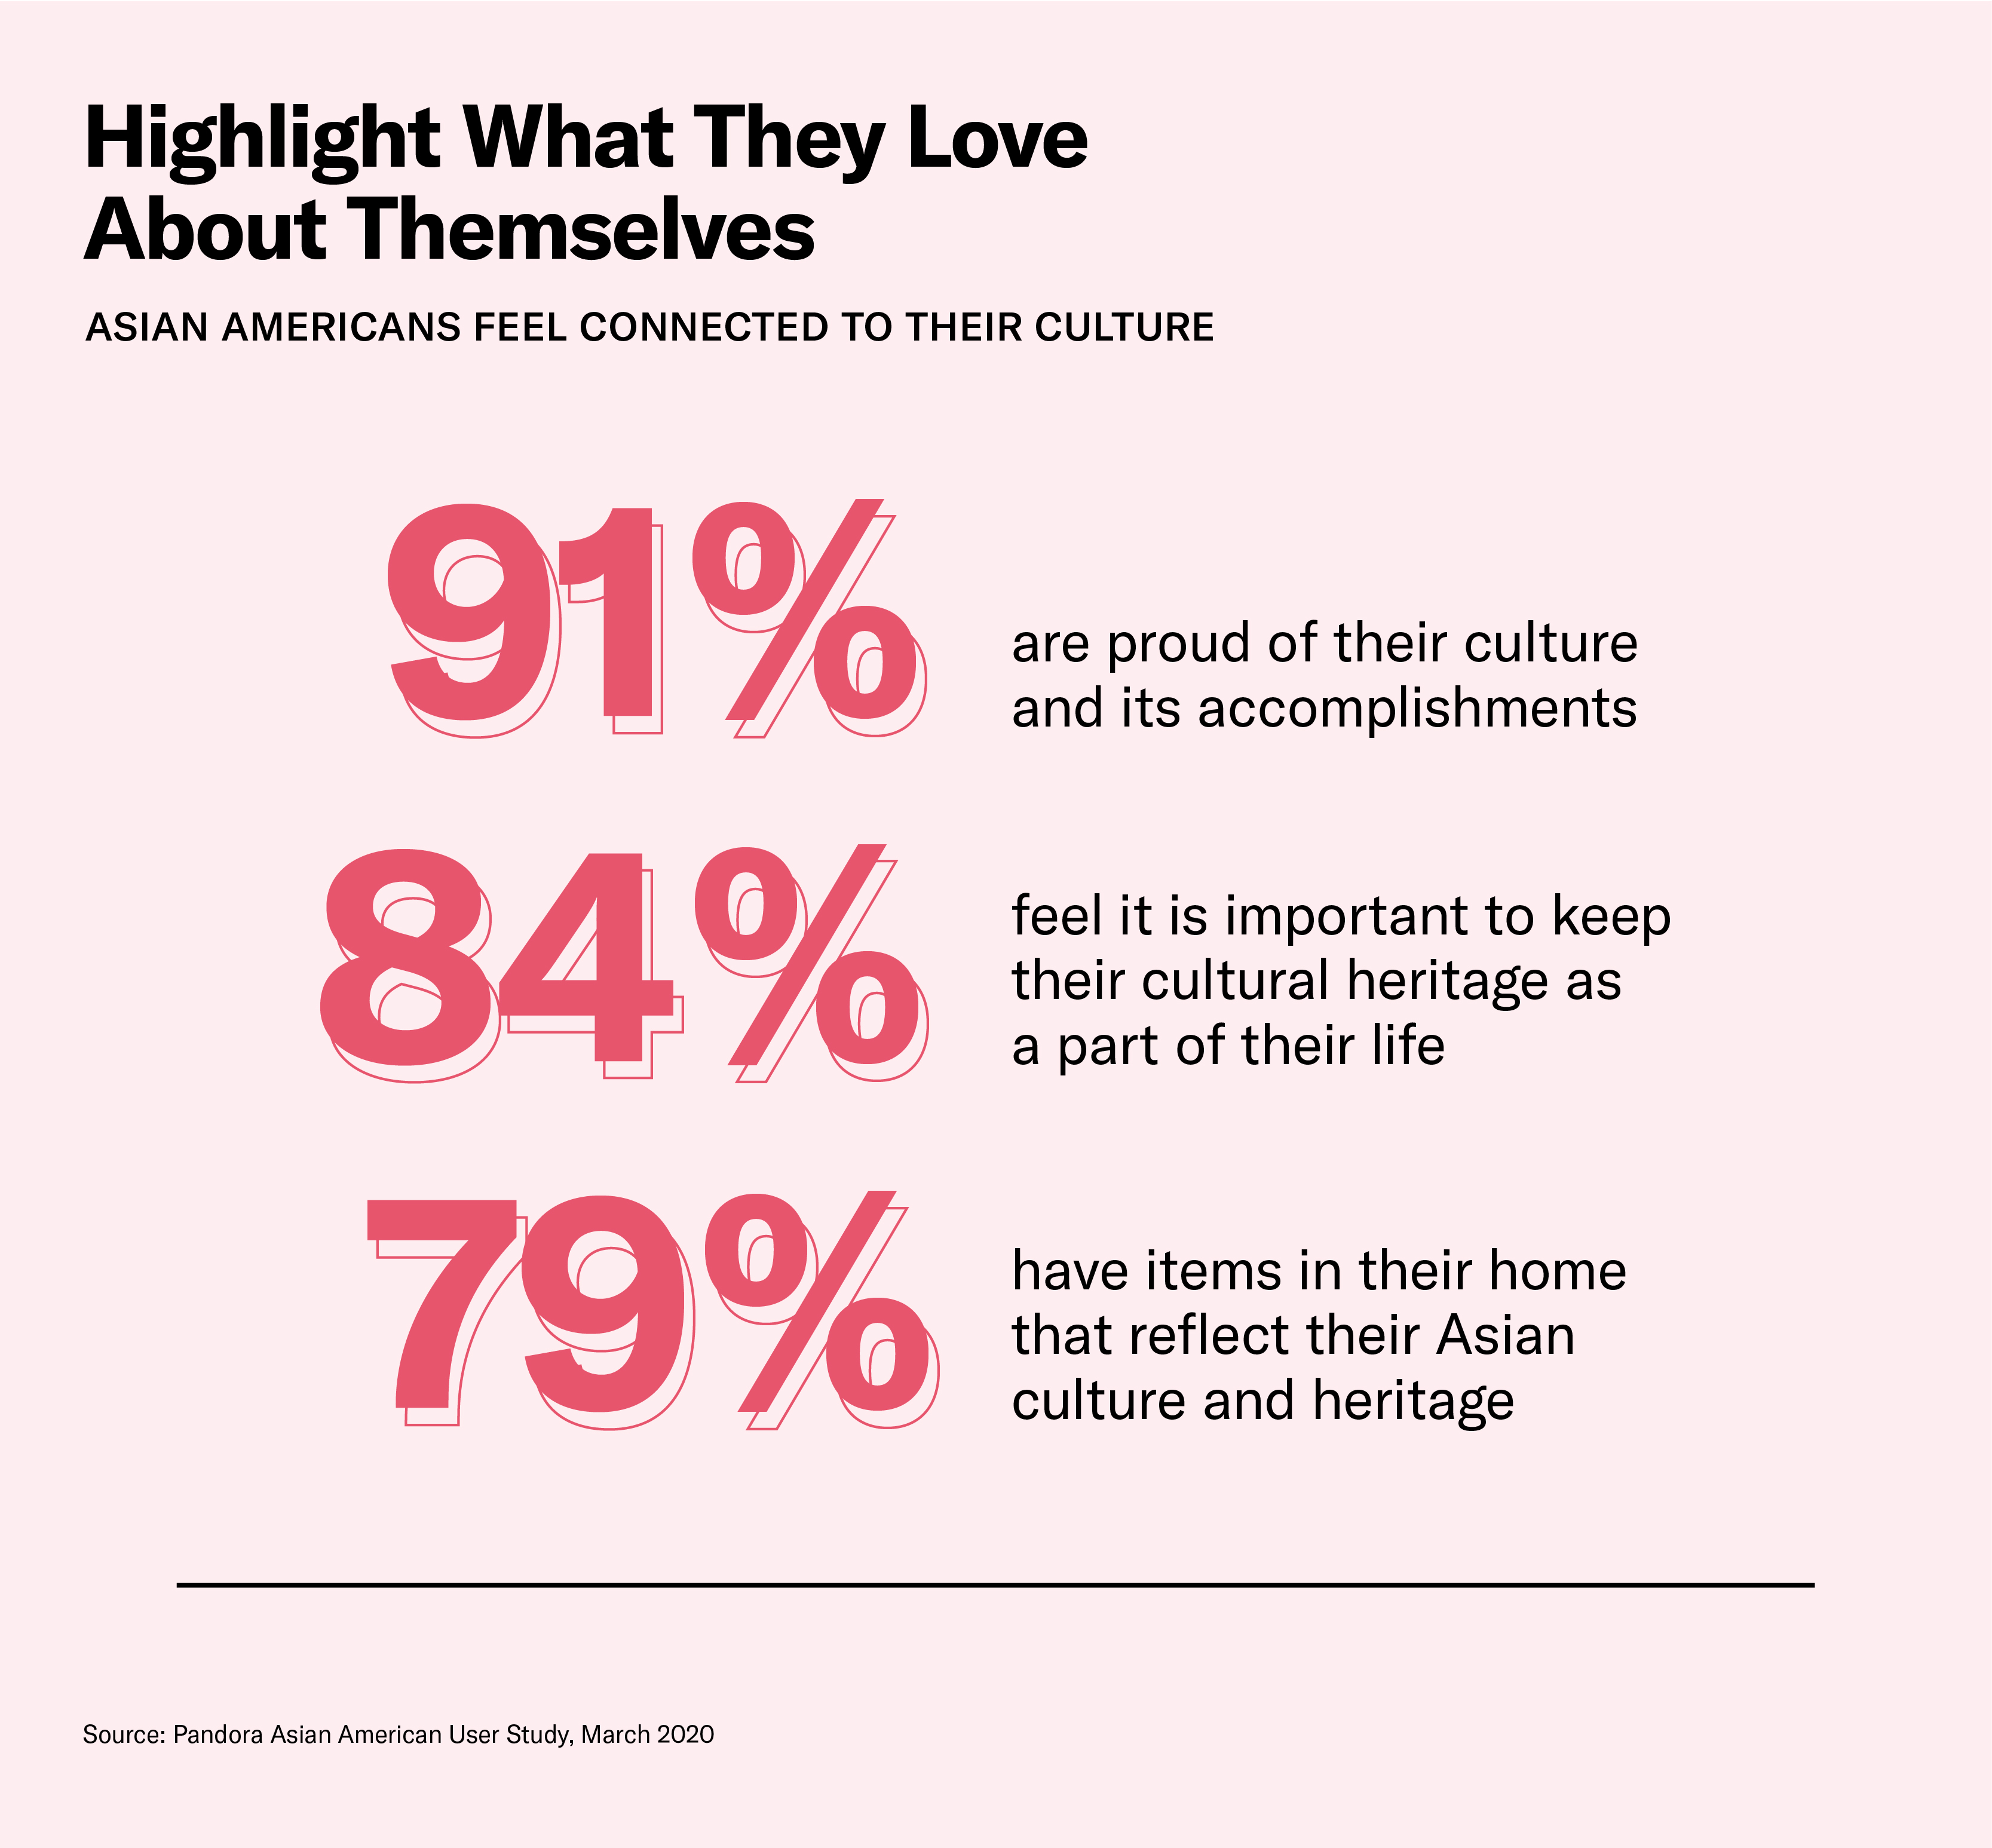 Highlight what Asian Americans love about themselves